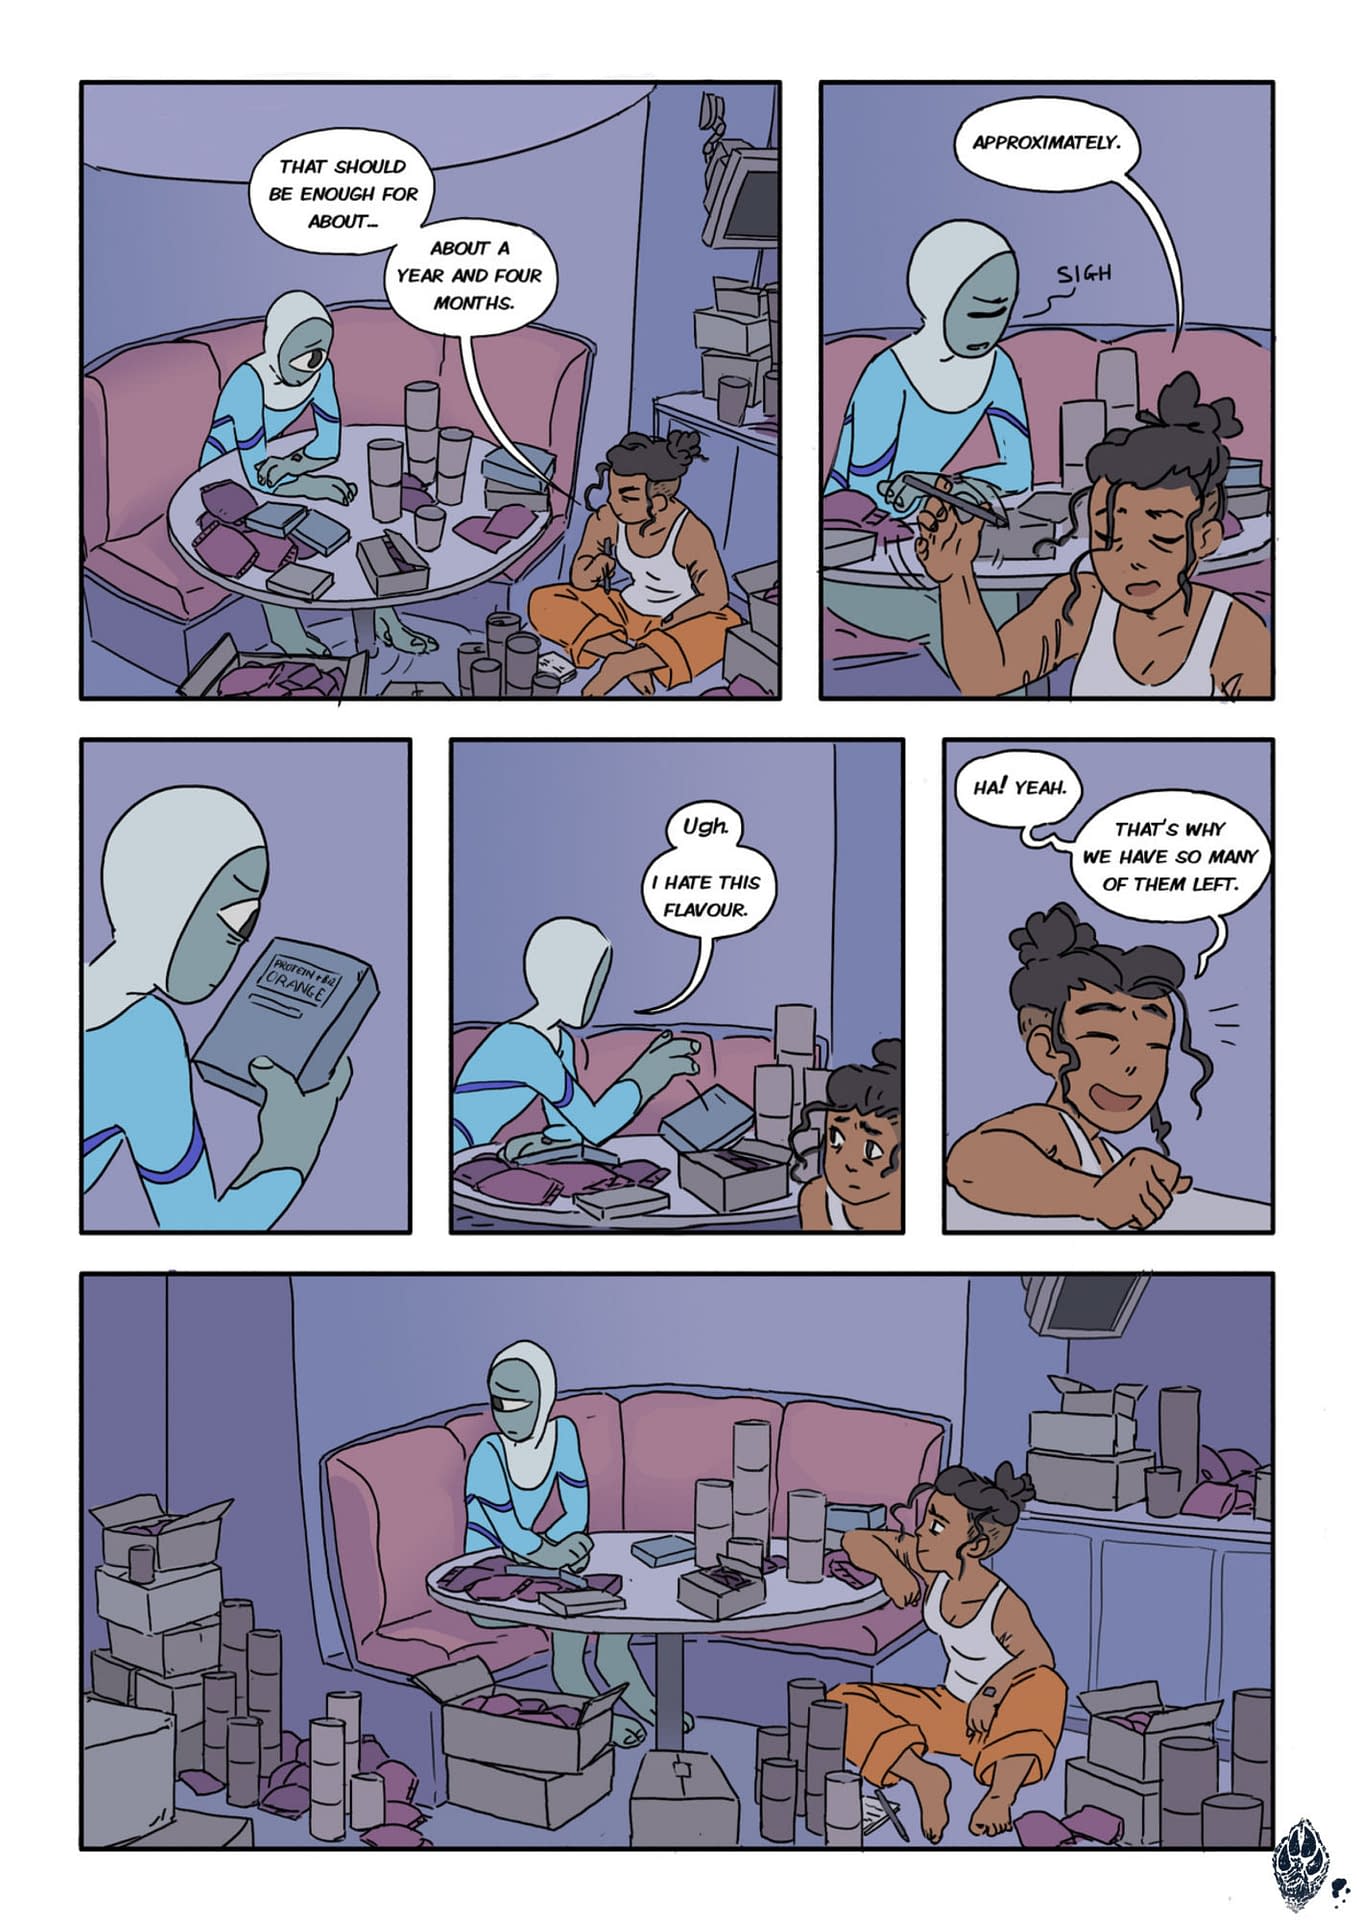 19 Pages From BUN&TEA, the Serial Comics Magazine Now on Kickstarter [Preview]